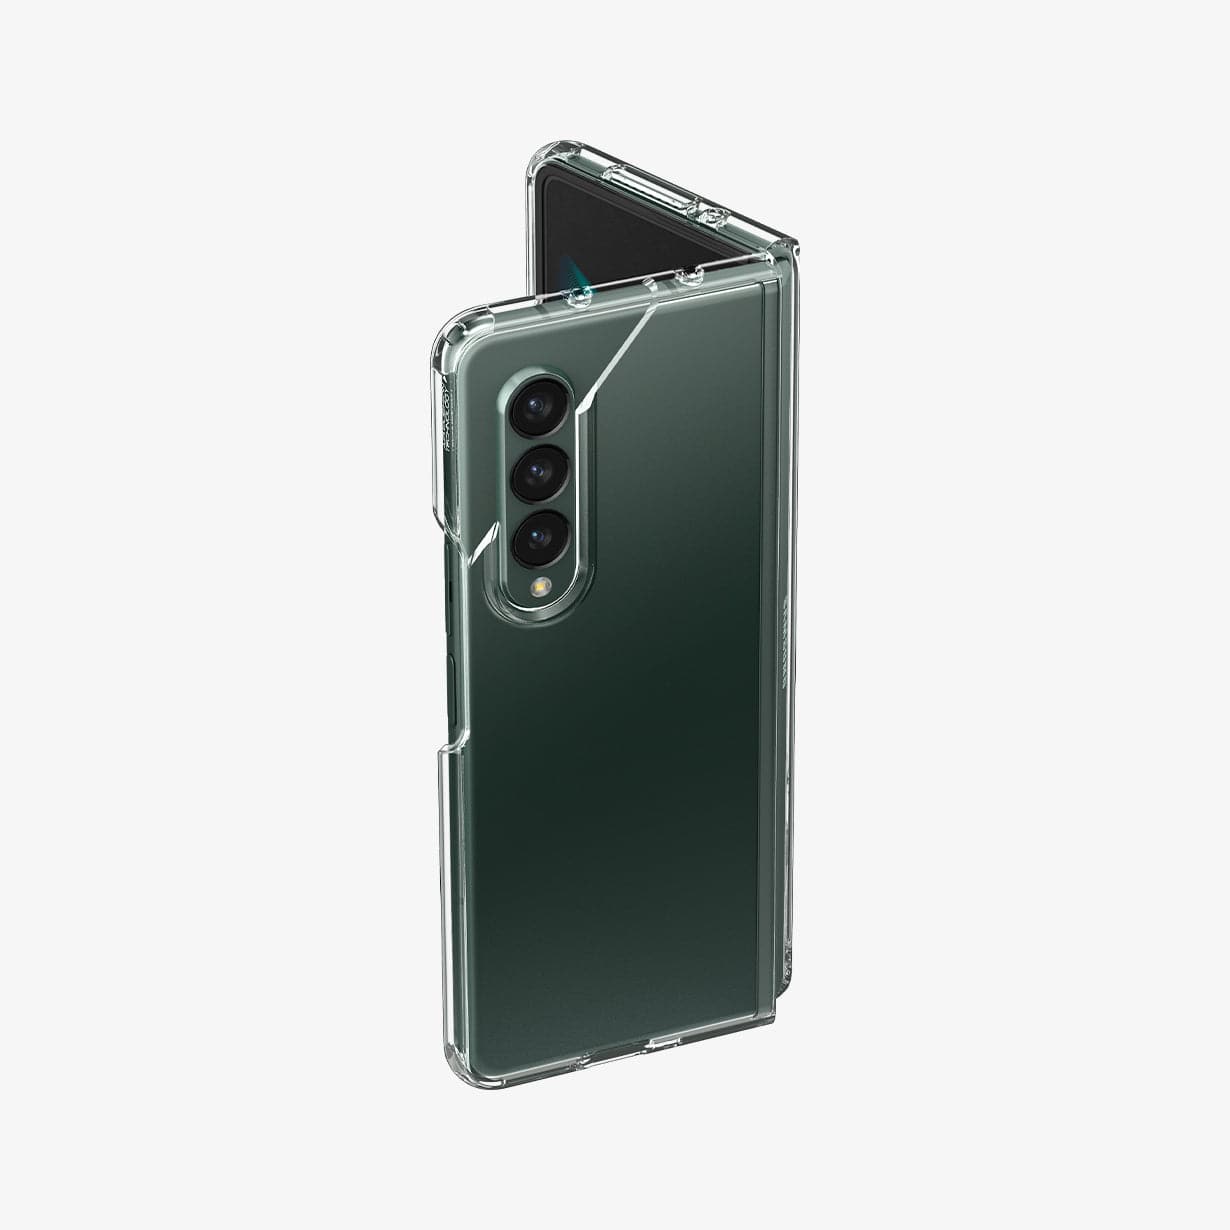 ACS02959 - Galaxy Z Fold 3 Case Ultra Hybrid in crystal clear showing the back, top and partial side